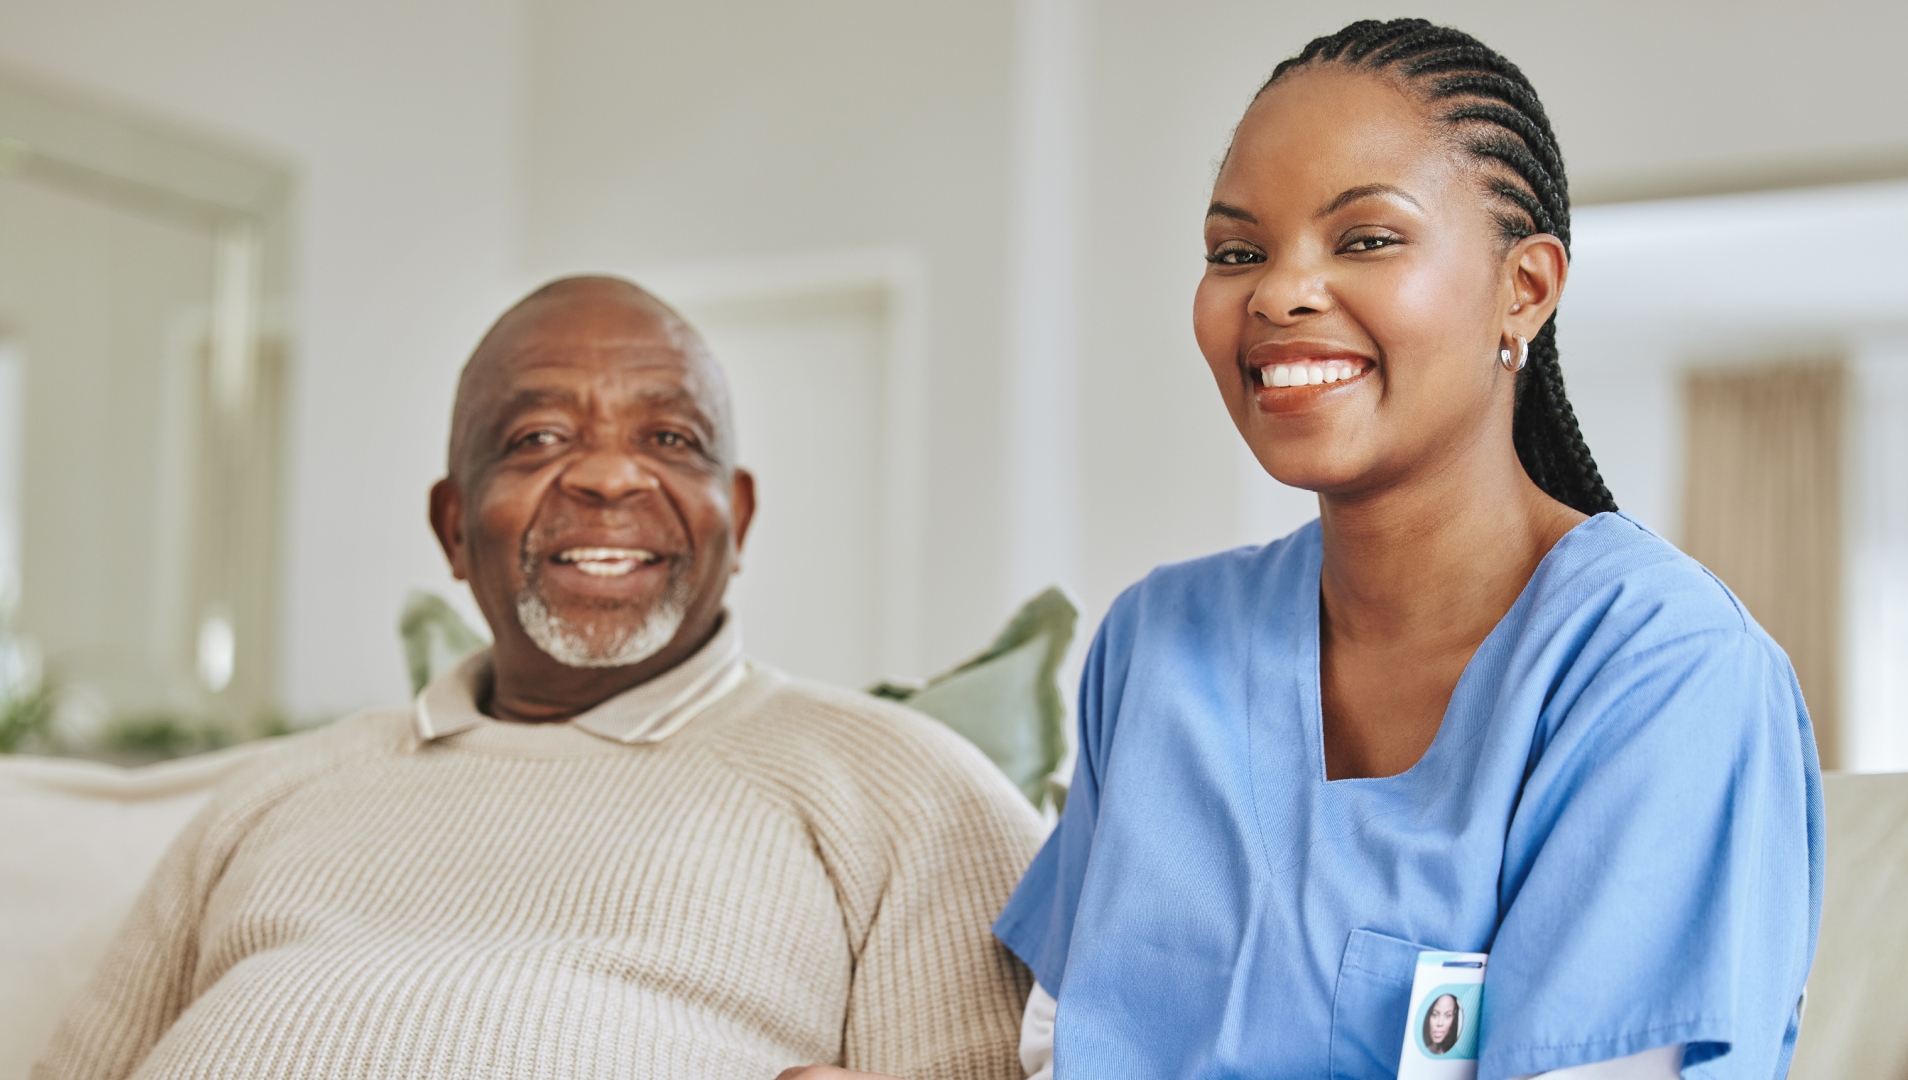 Supportive Care Assistant Program